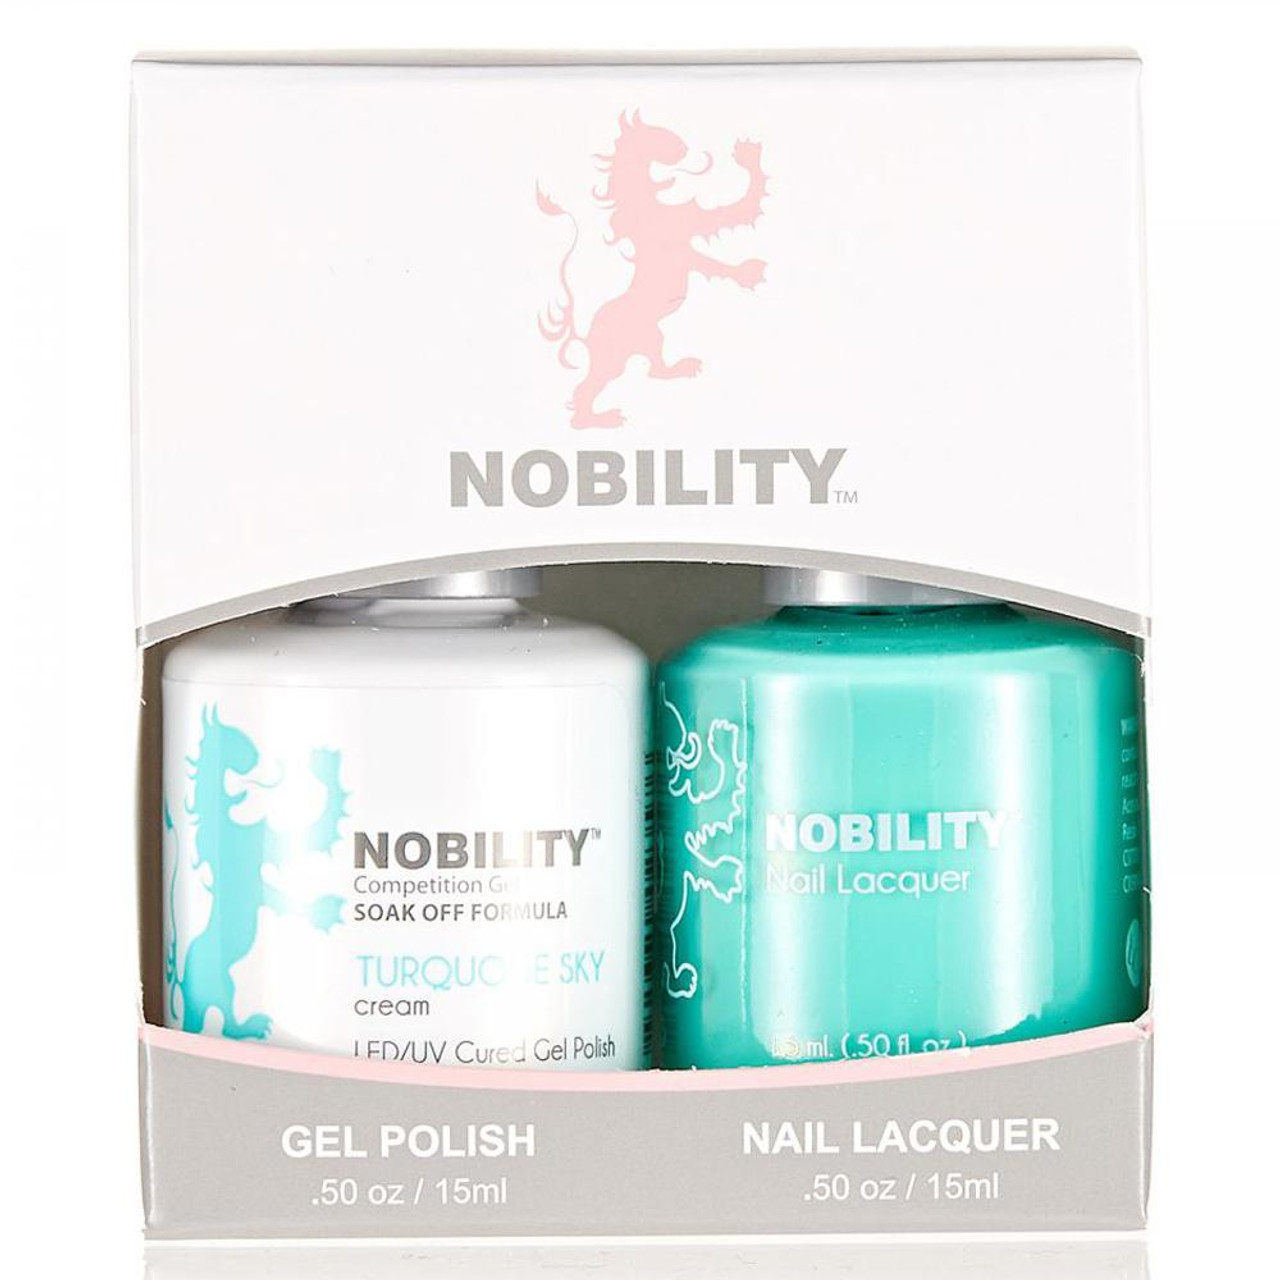 LeChat Nobility Gel Polish & Nail Lacquer Duo Set Turquoise Sky - .5 oz / 15 ml